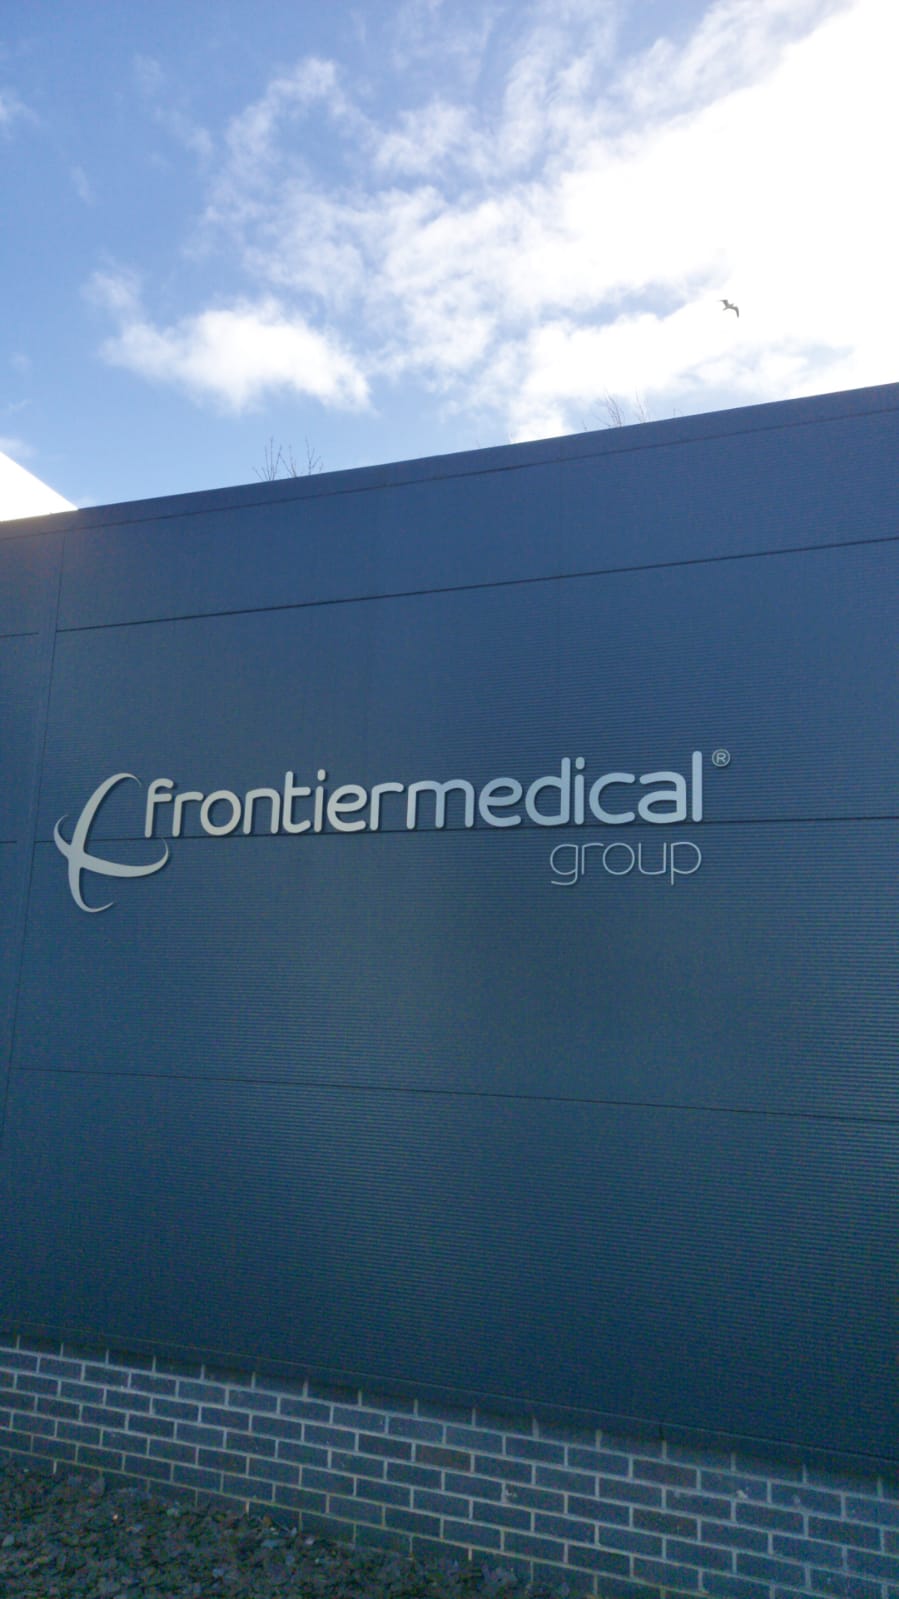 Frontier Medical Group in Blackwood is a Taclus customer.